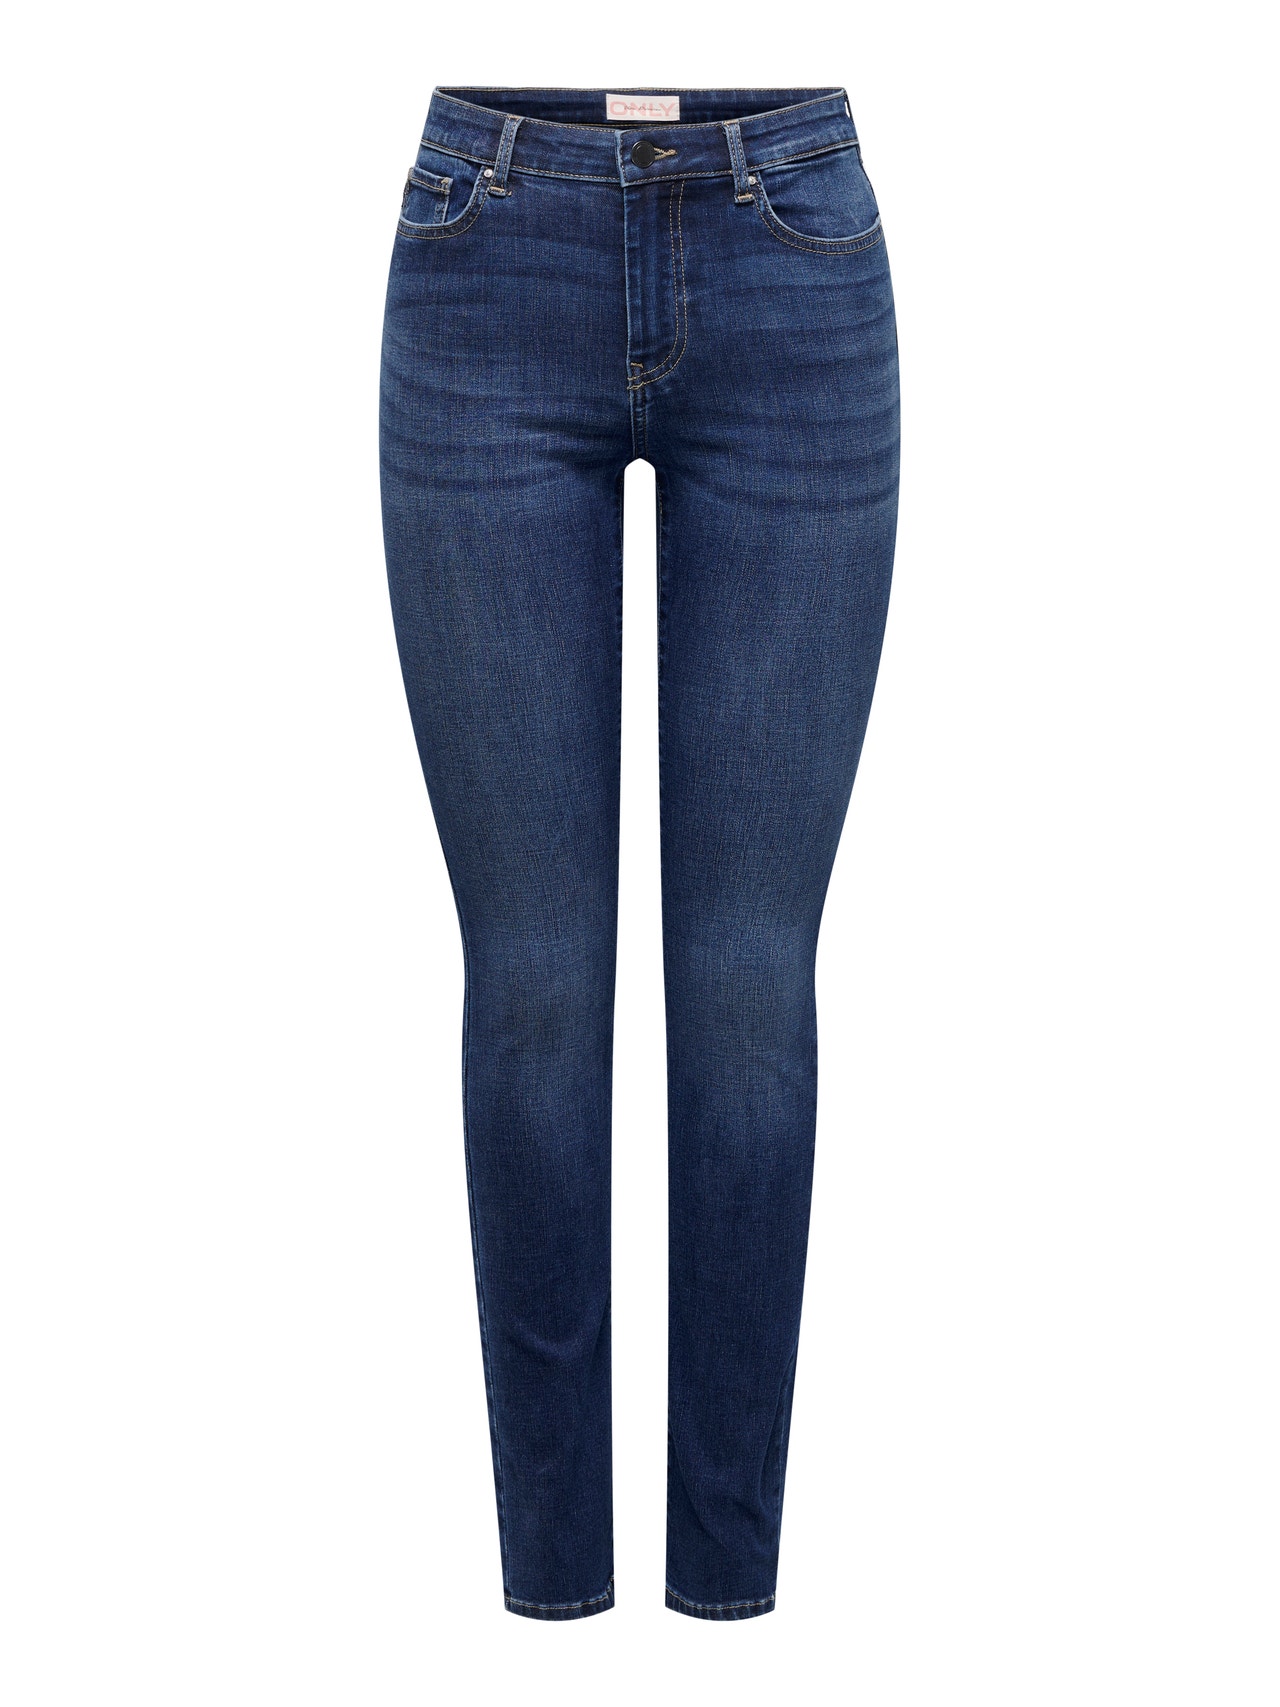 ONLY Jeans Slim Fit Taille moyenne -Medium Blue Denim - 15303828